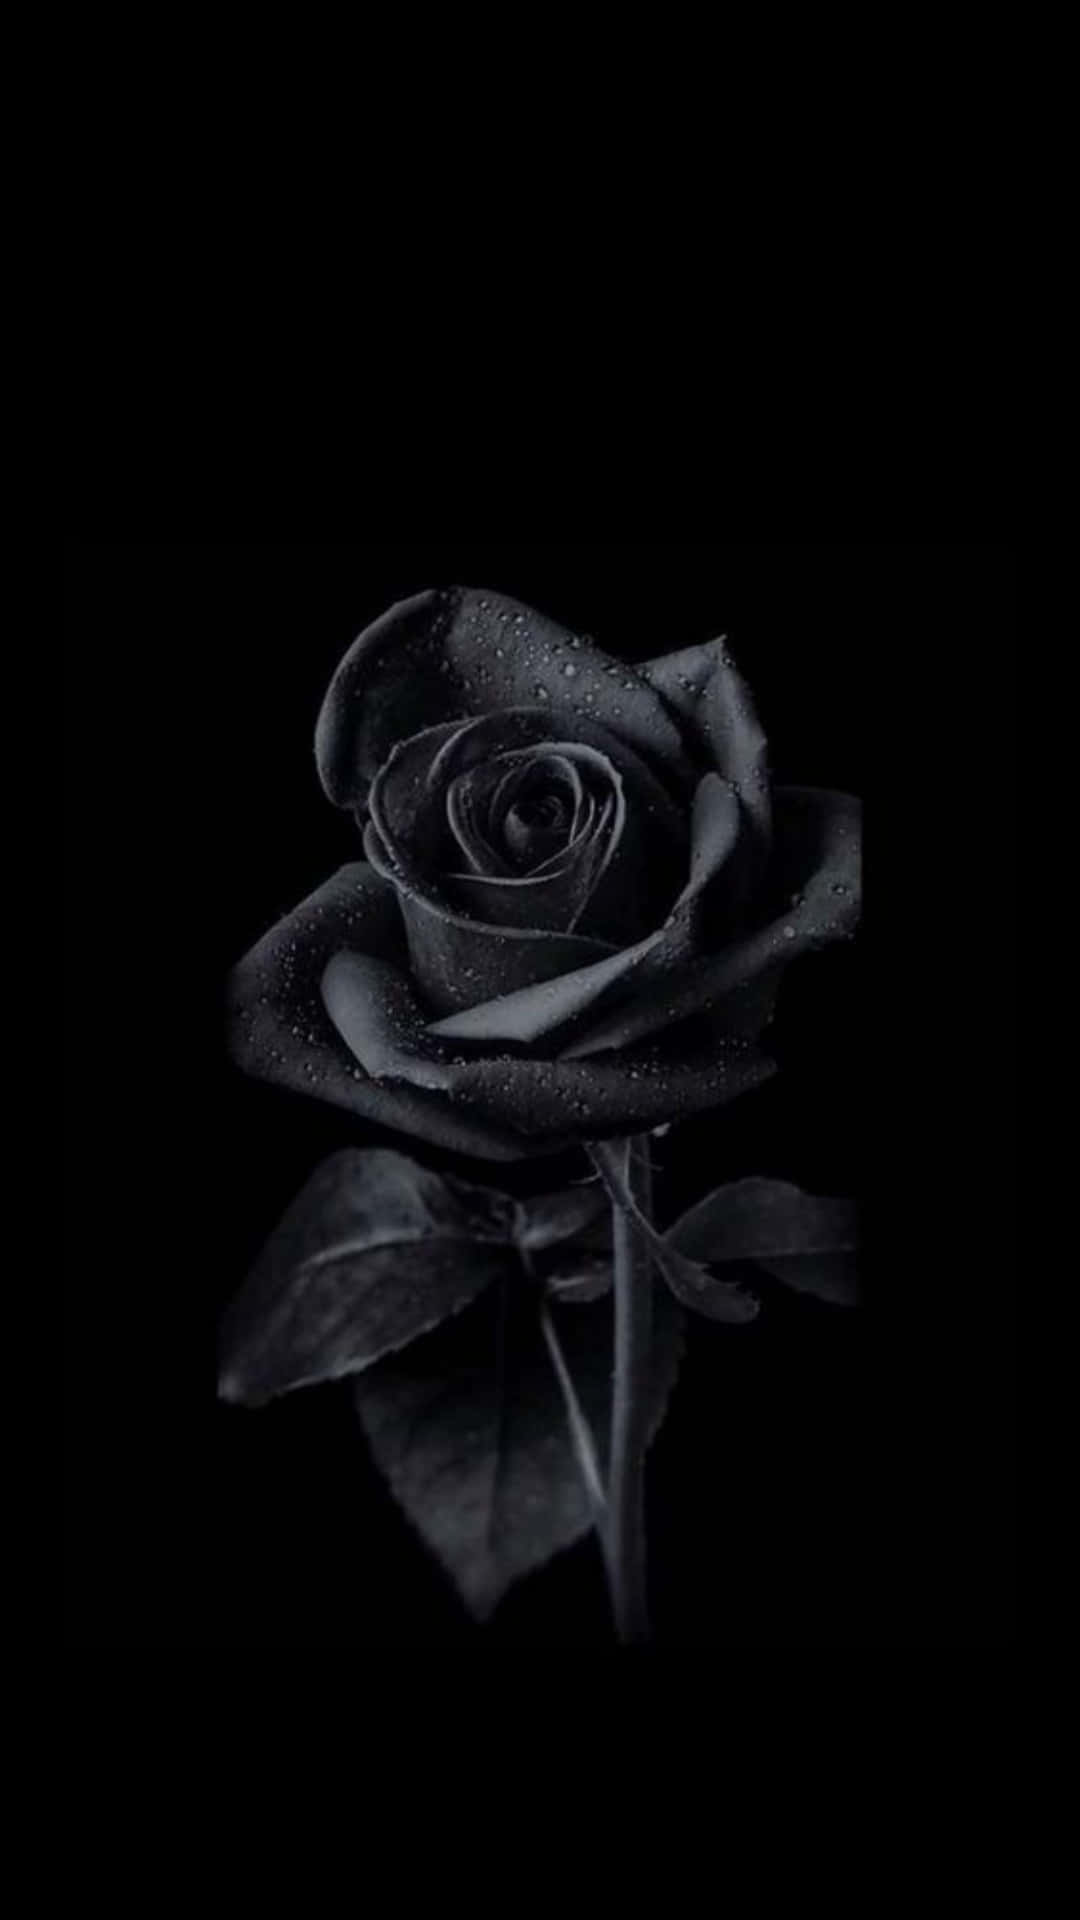 Monochrome Rose With Dewdrops Wallpaper